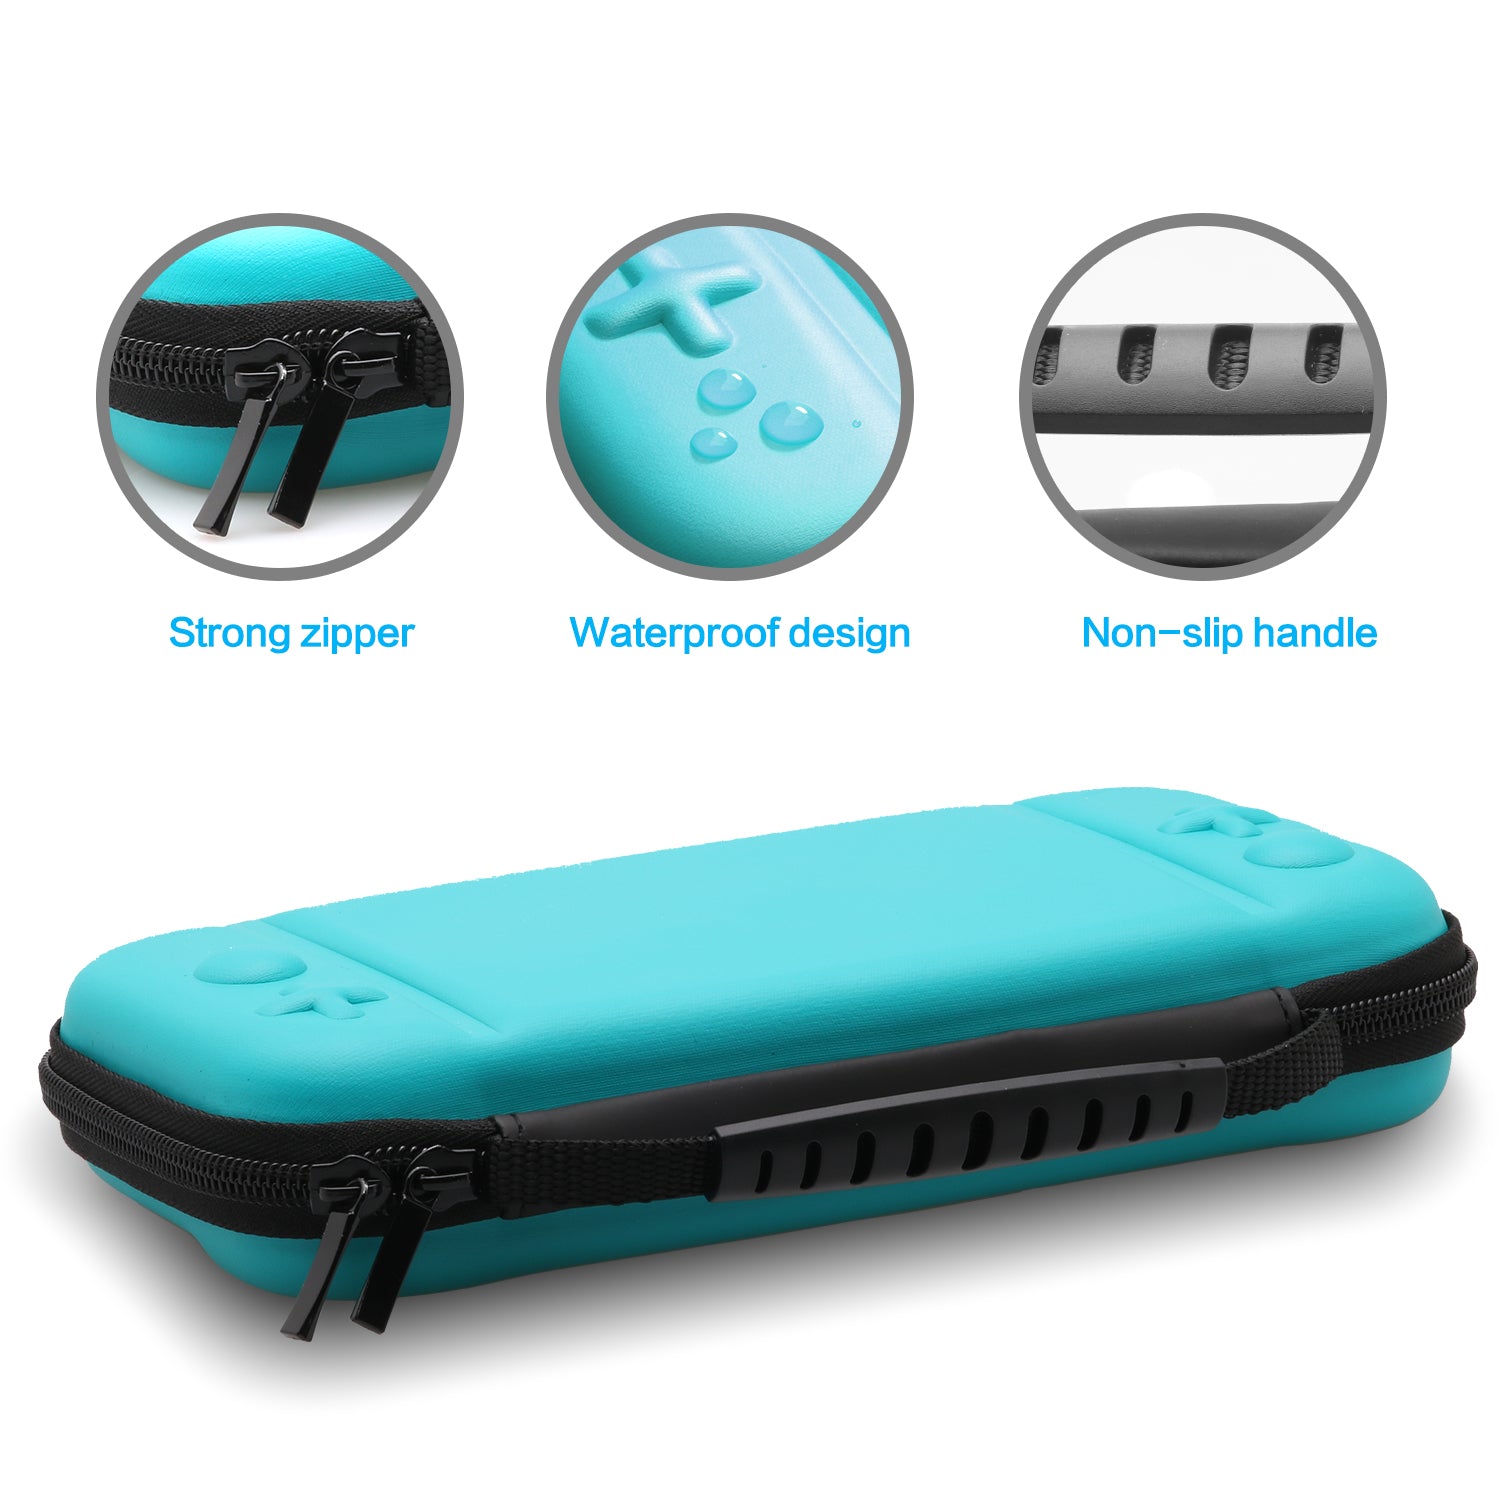 Carrying Case for Nintendo Switch Lite - Turquoise – ECHZOVE